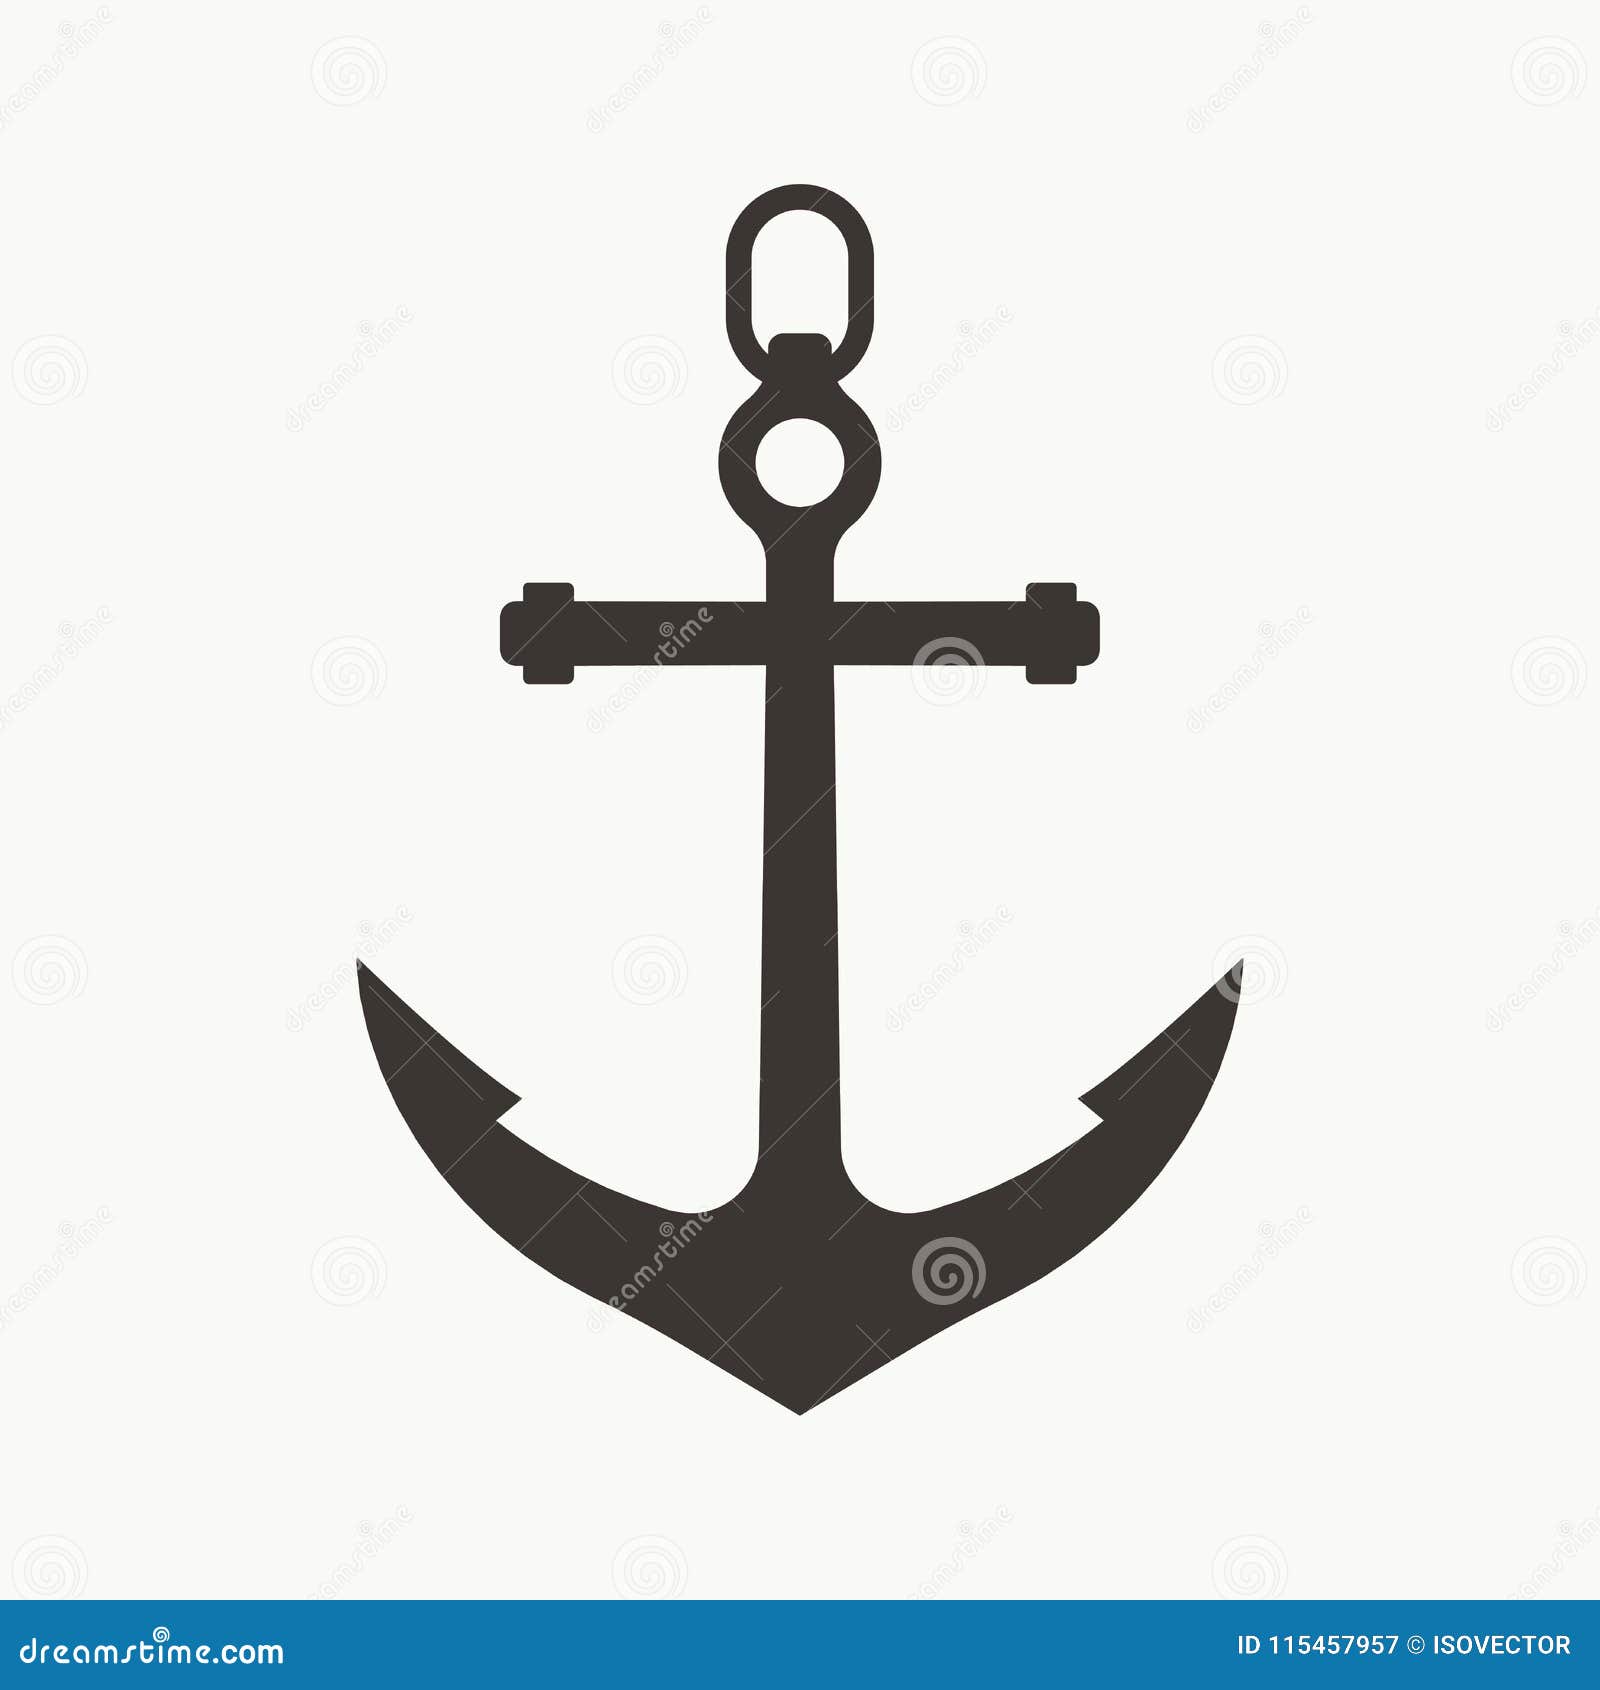 Ship Anchor Simple Icon stock vector. Illustration of black - 115457957